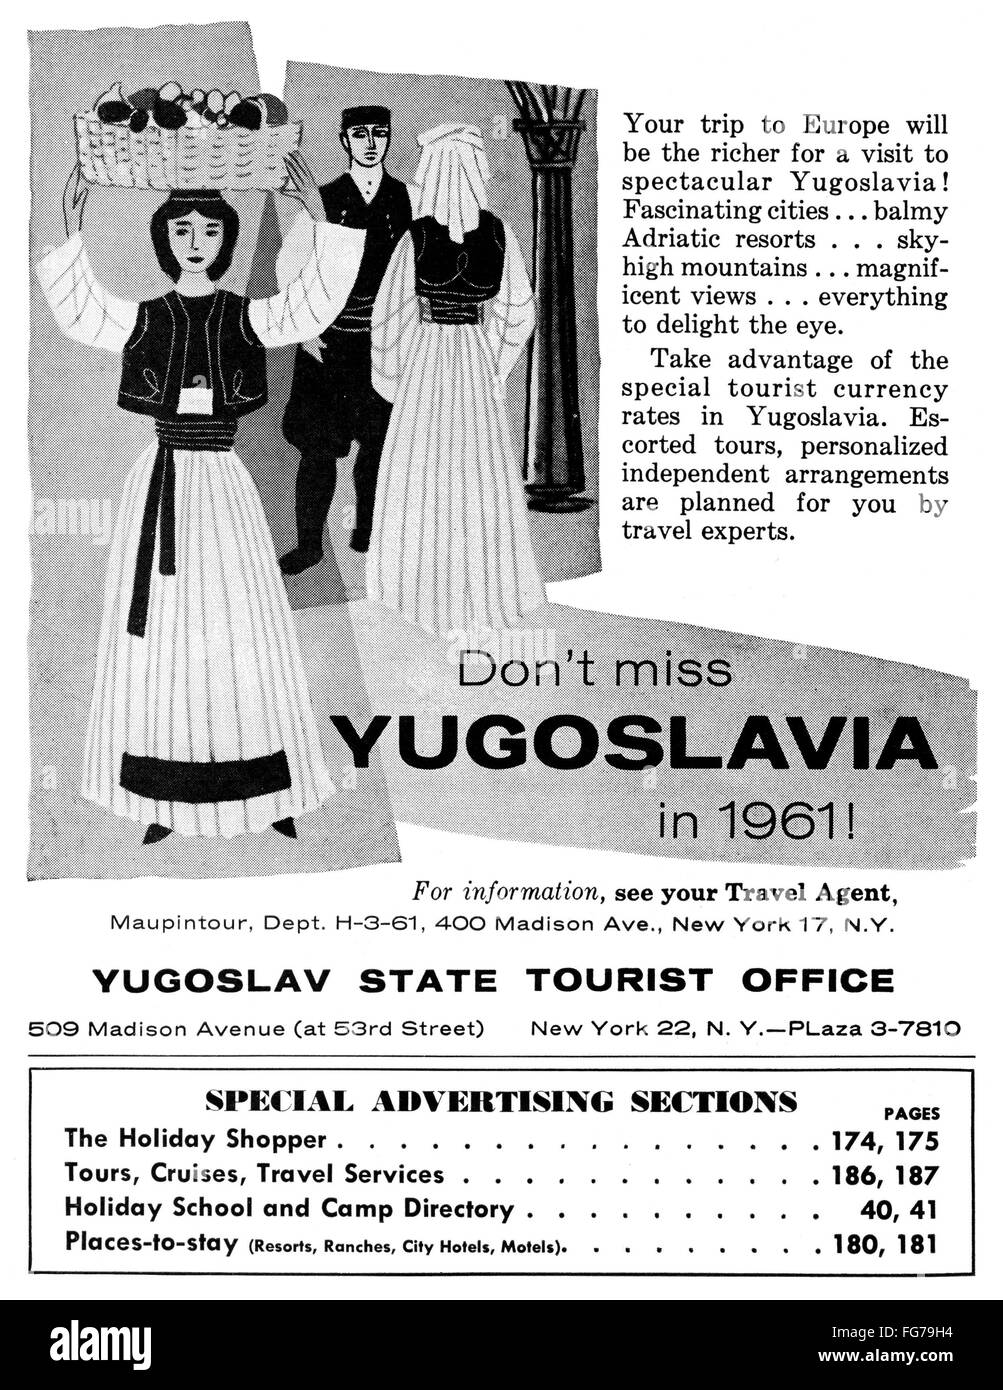 AD: YUGOSLAVIA, 1961. /nAmerican advertisement for tourism in Yugoslavia, sponsored by the Yugoslav State Tourist Office, 1961. Stock Photo